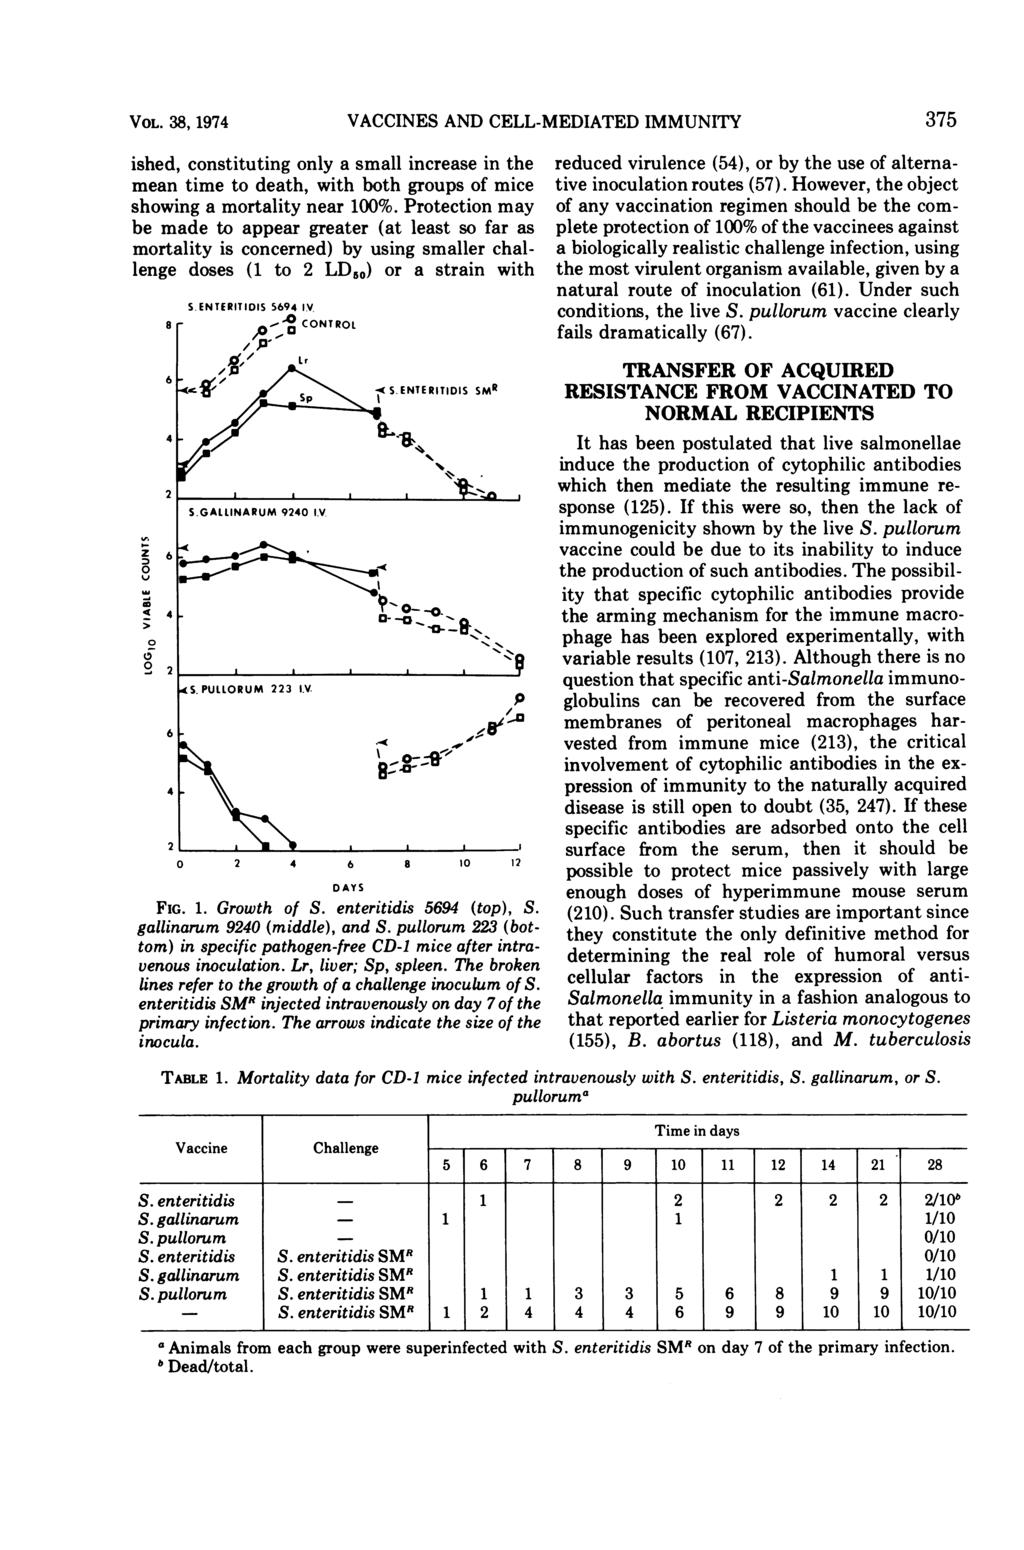 VOL. 38, 1974 ished, constituting only a small increase in the mean time to death, with both groups of mice showing a mortality near 1%.